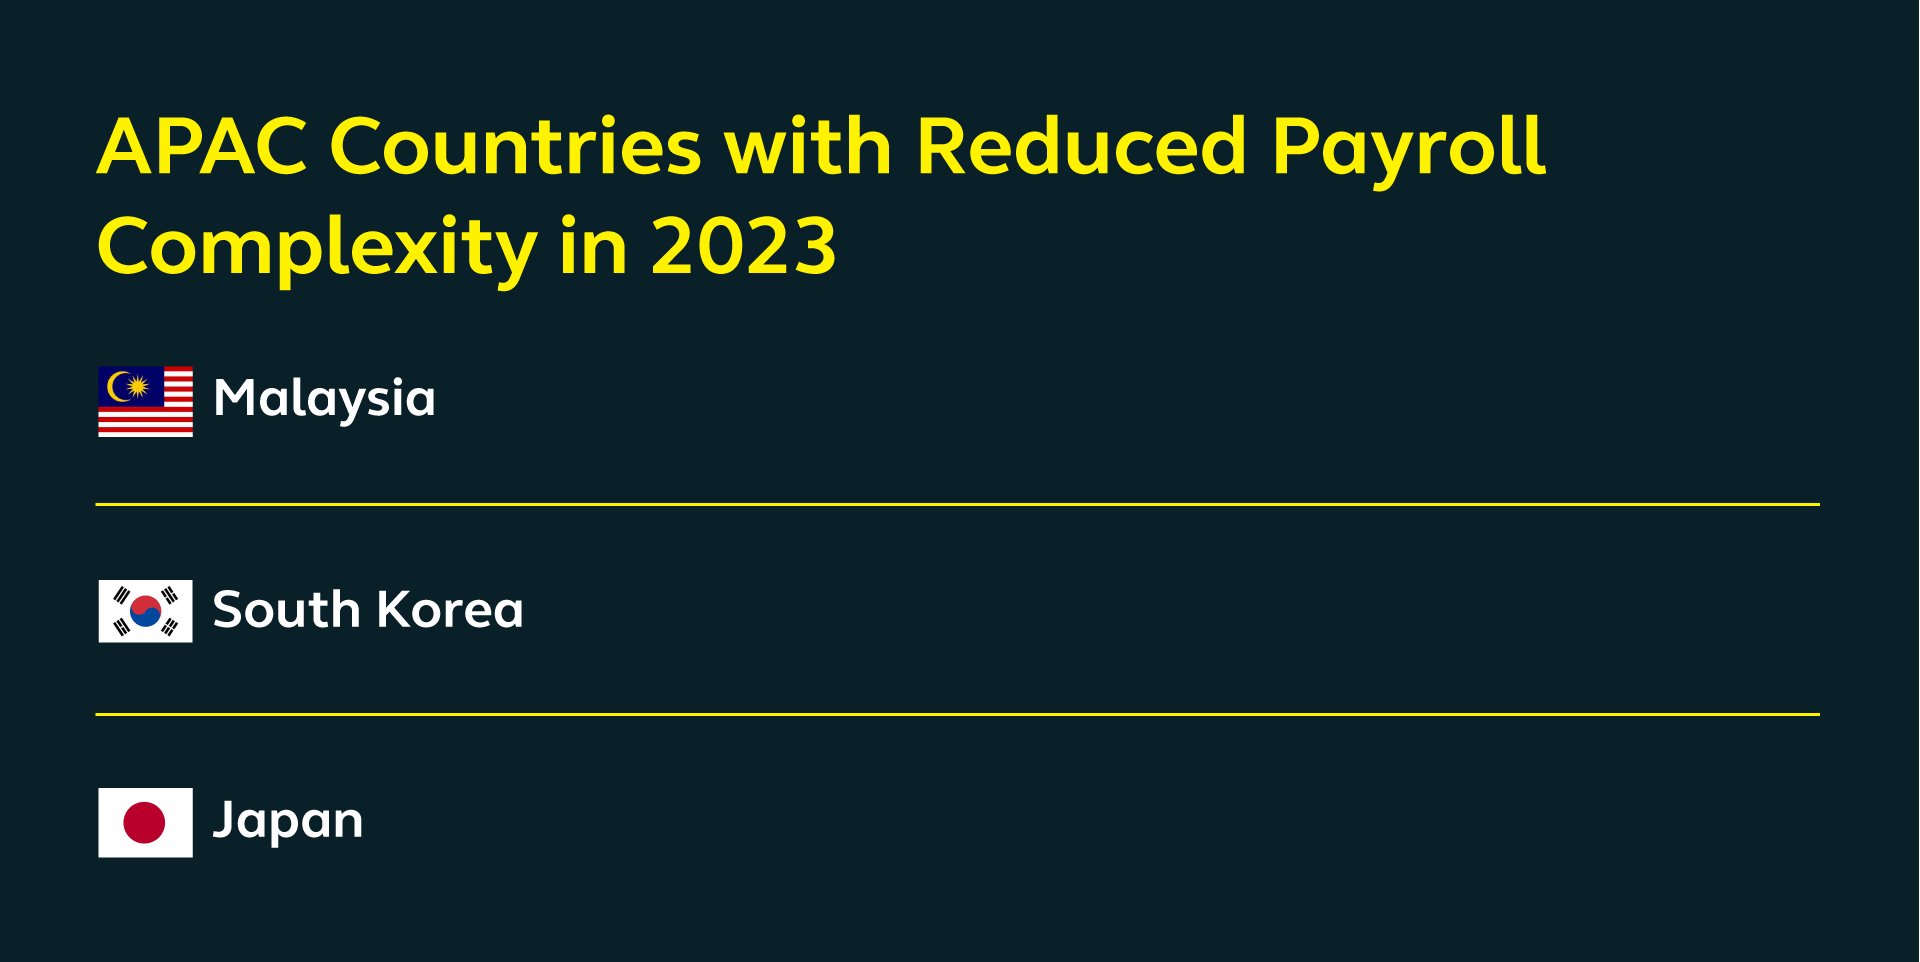 APAC Countries with Reduced Payroll Complexity in 2023